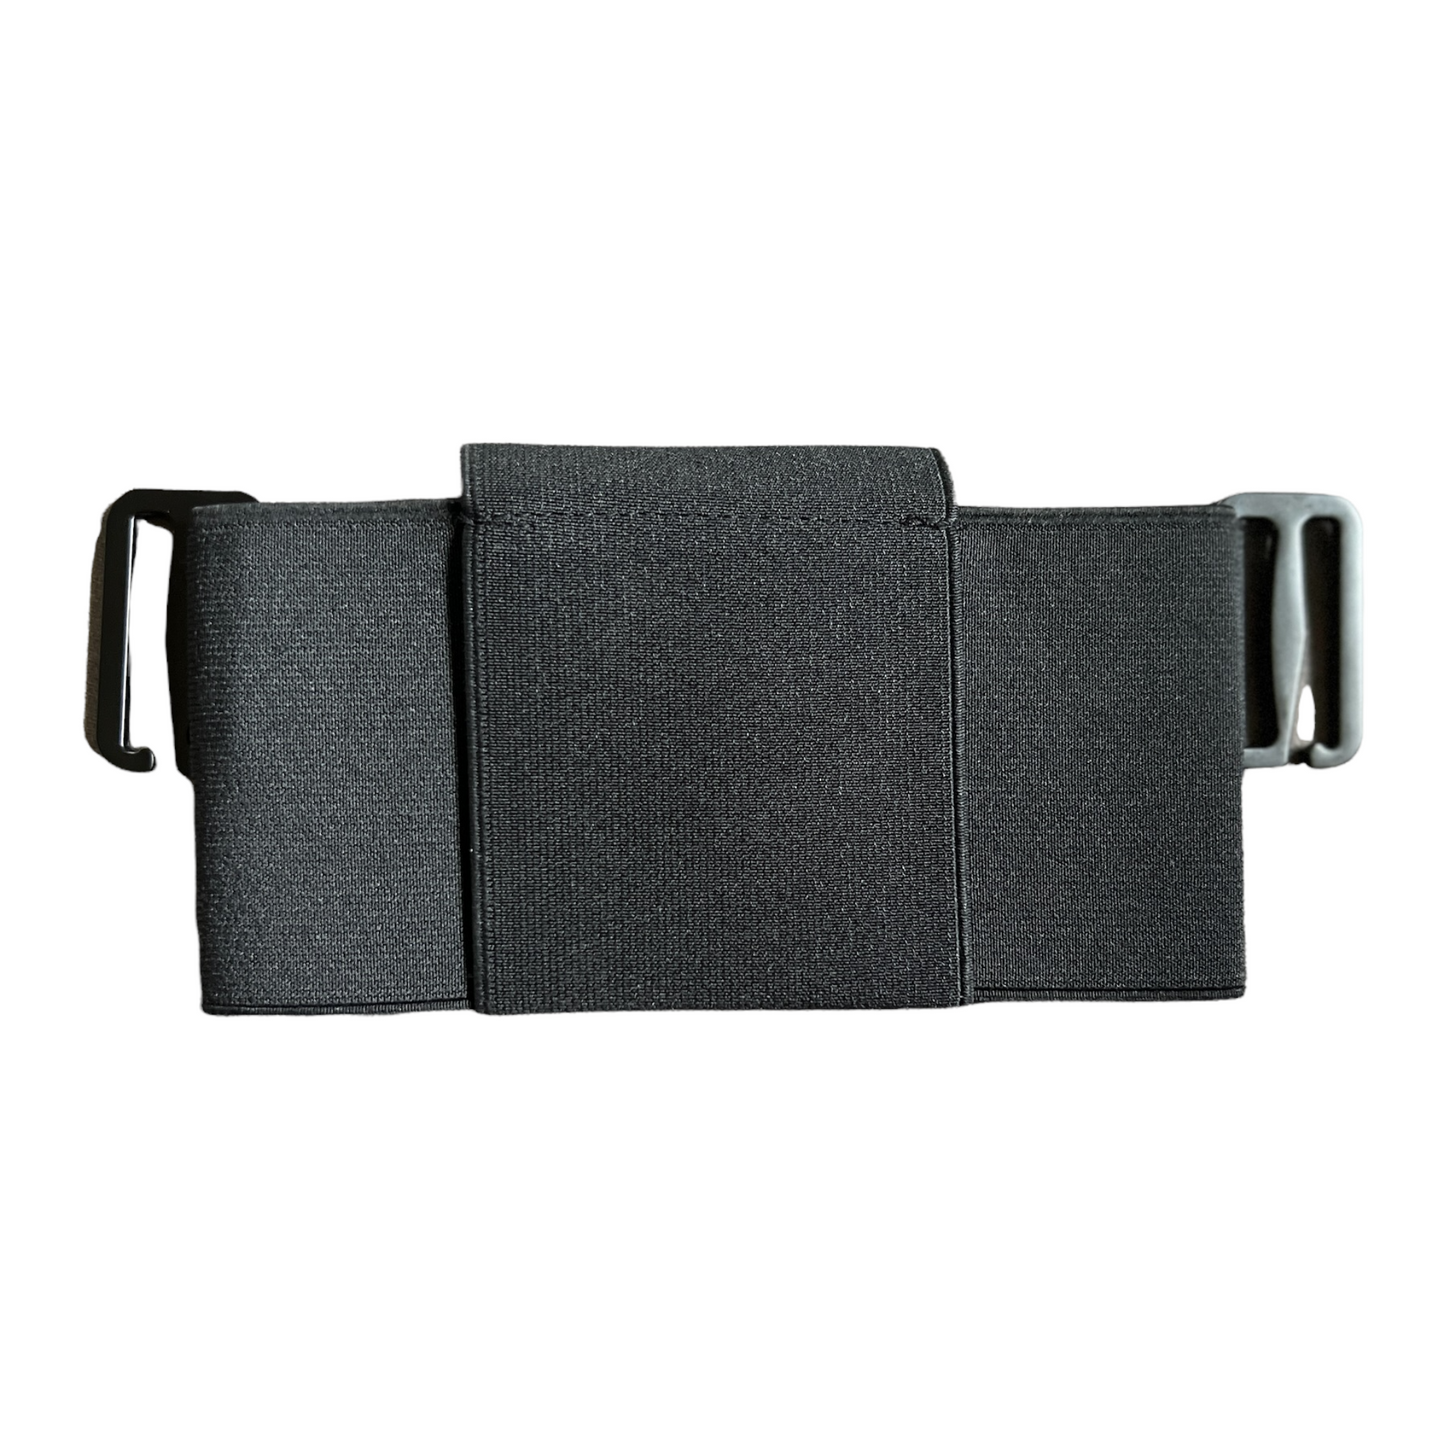 💎 Phone Pouch for Shoulder Strap, Belt, Mobility Device Mobile Phone Accessories SPIRIT SPARKPLUGS Black  